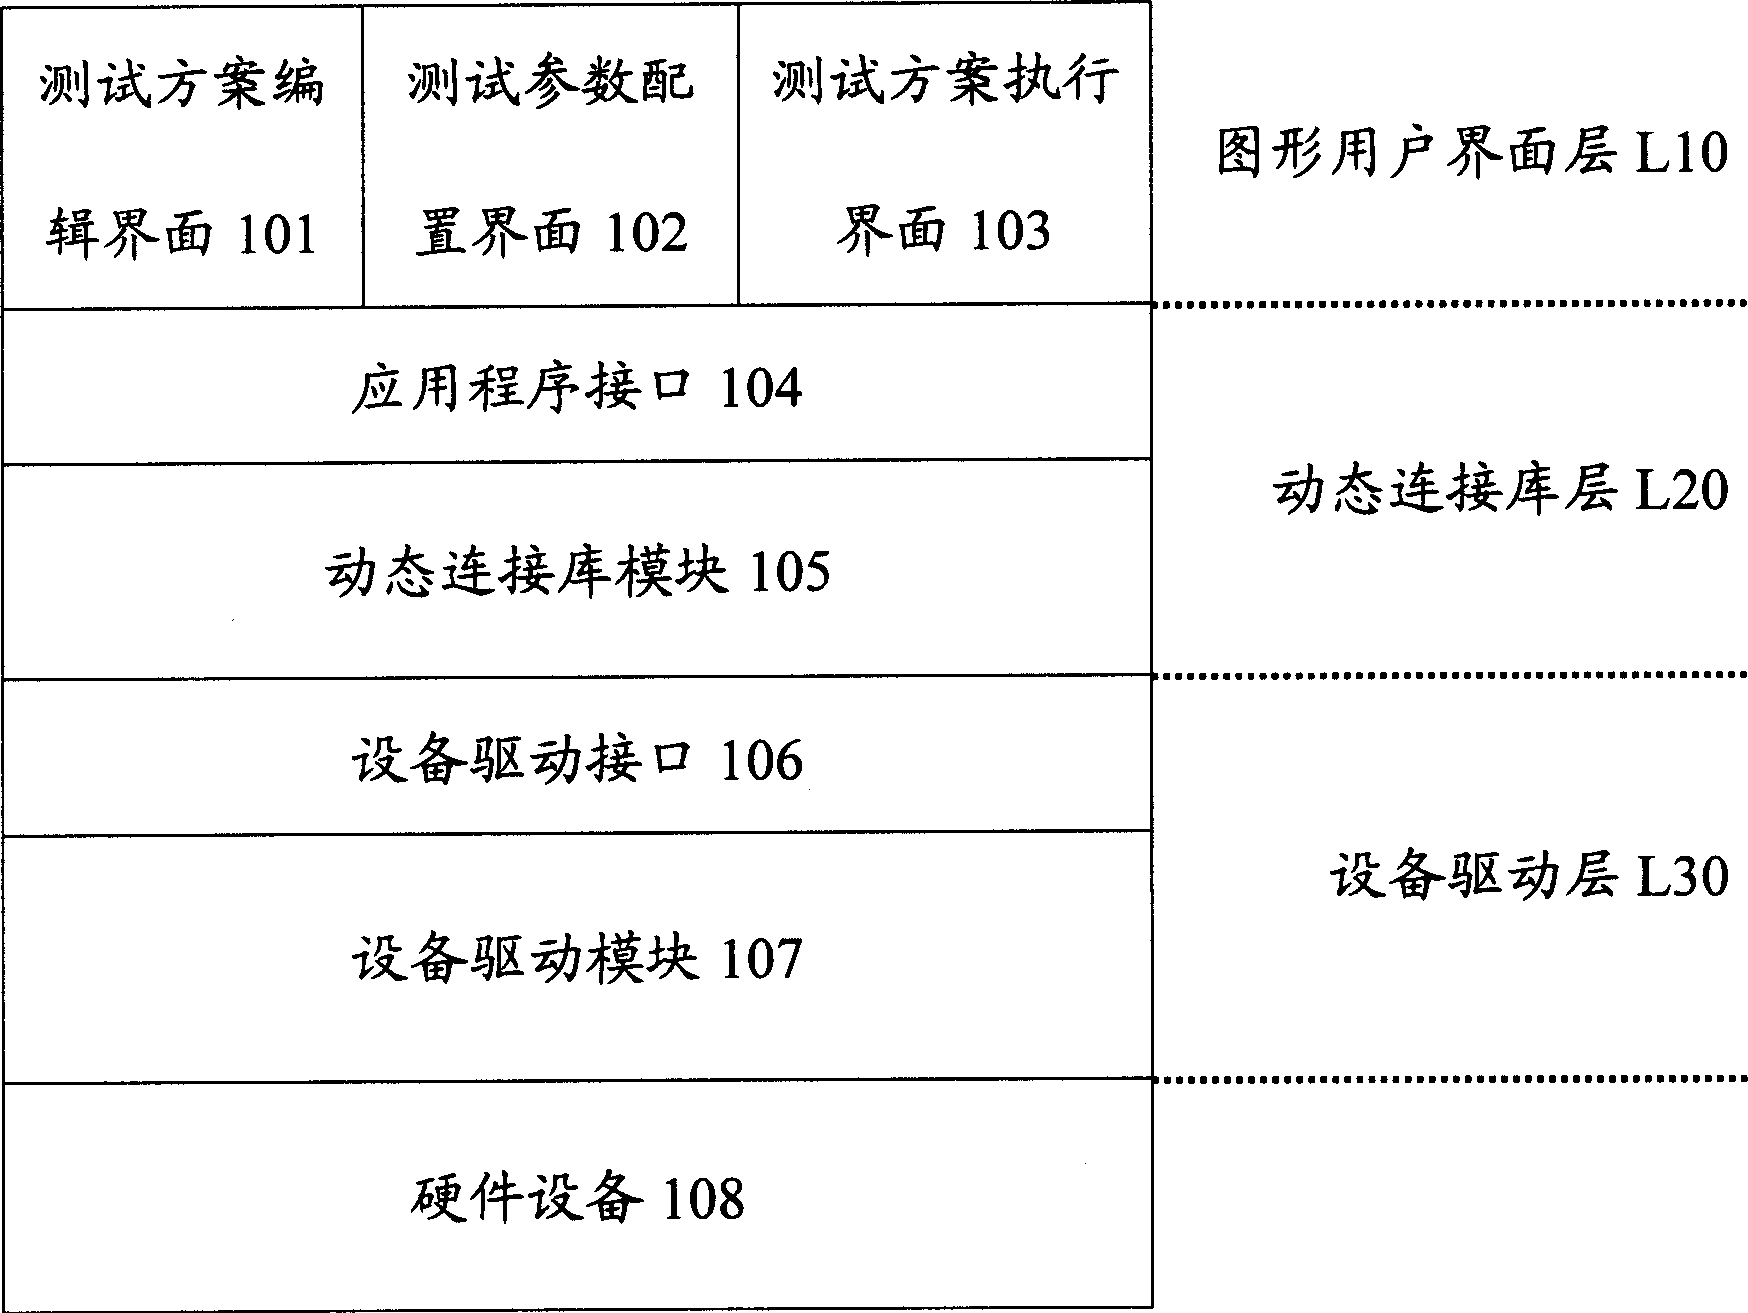 Rapid diagnosis testing system and method for computer hardware